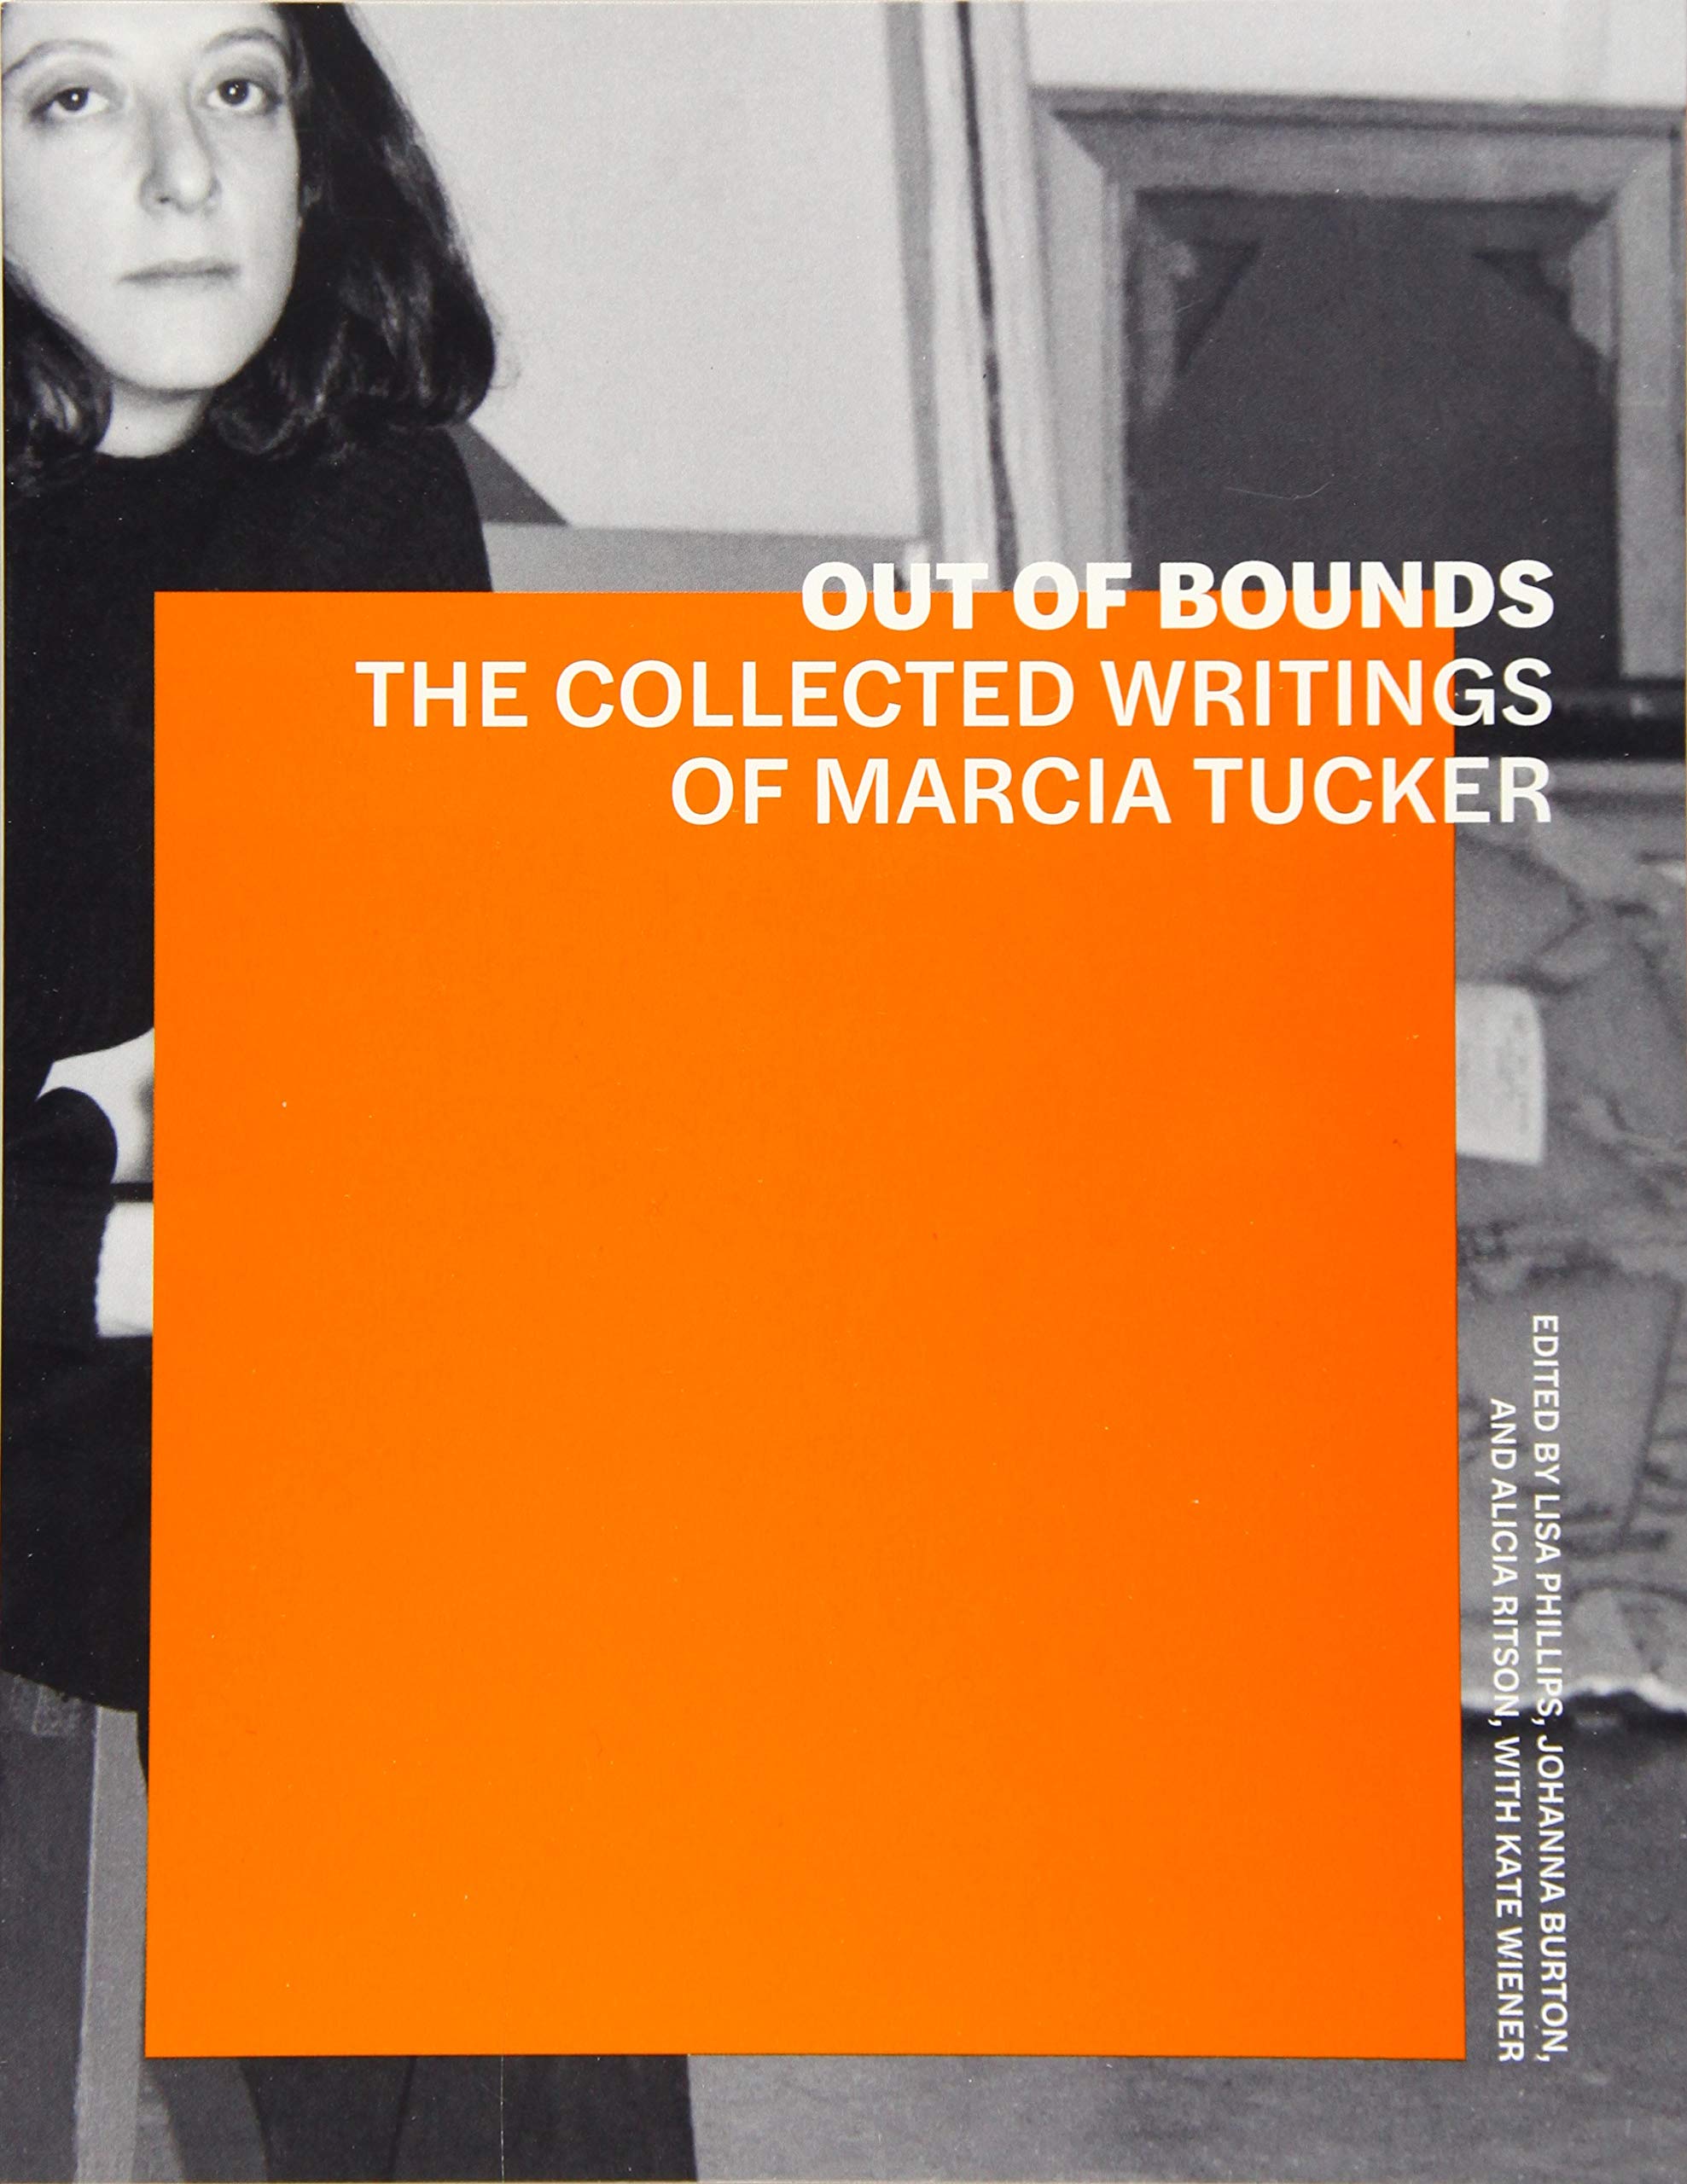 Out of Bounds - The Collected Writings of Marcia Tucker